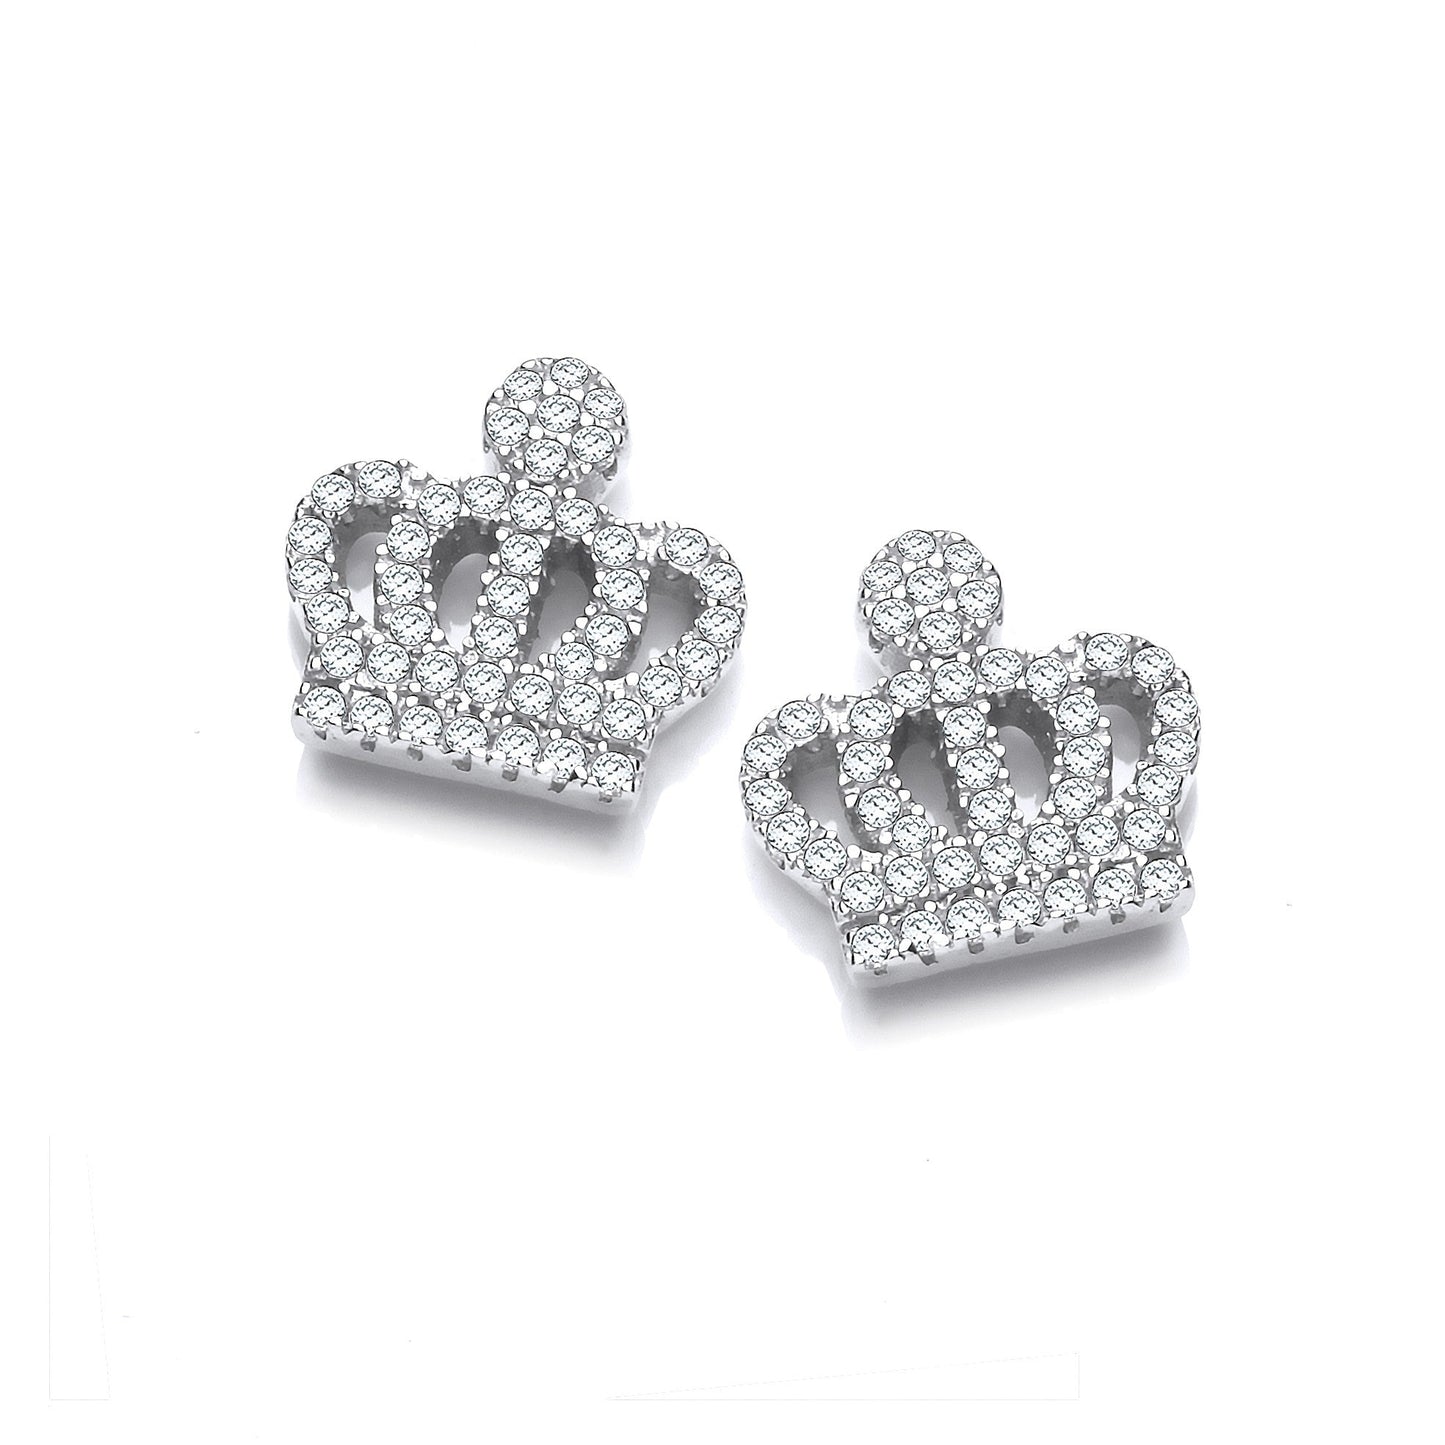 Stud 925 Sterling Silver Crown Earrings Set With CZs - FJewellery